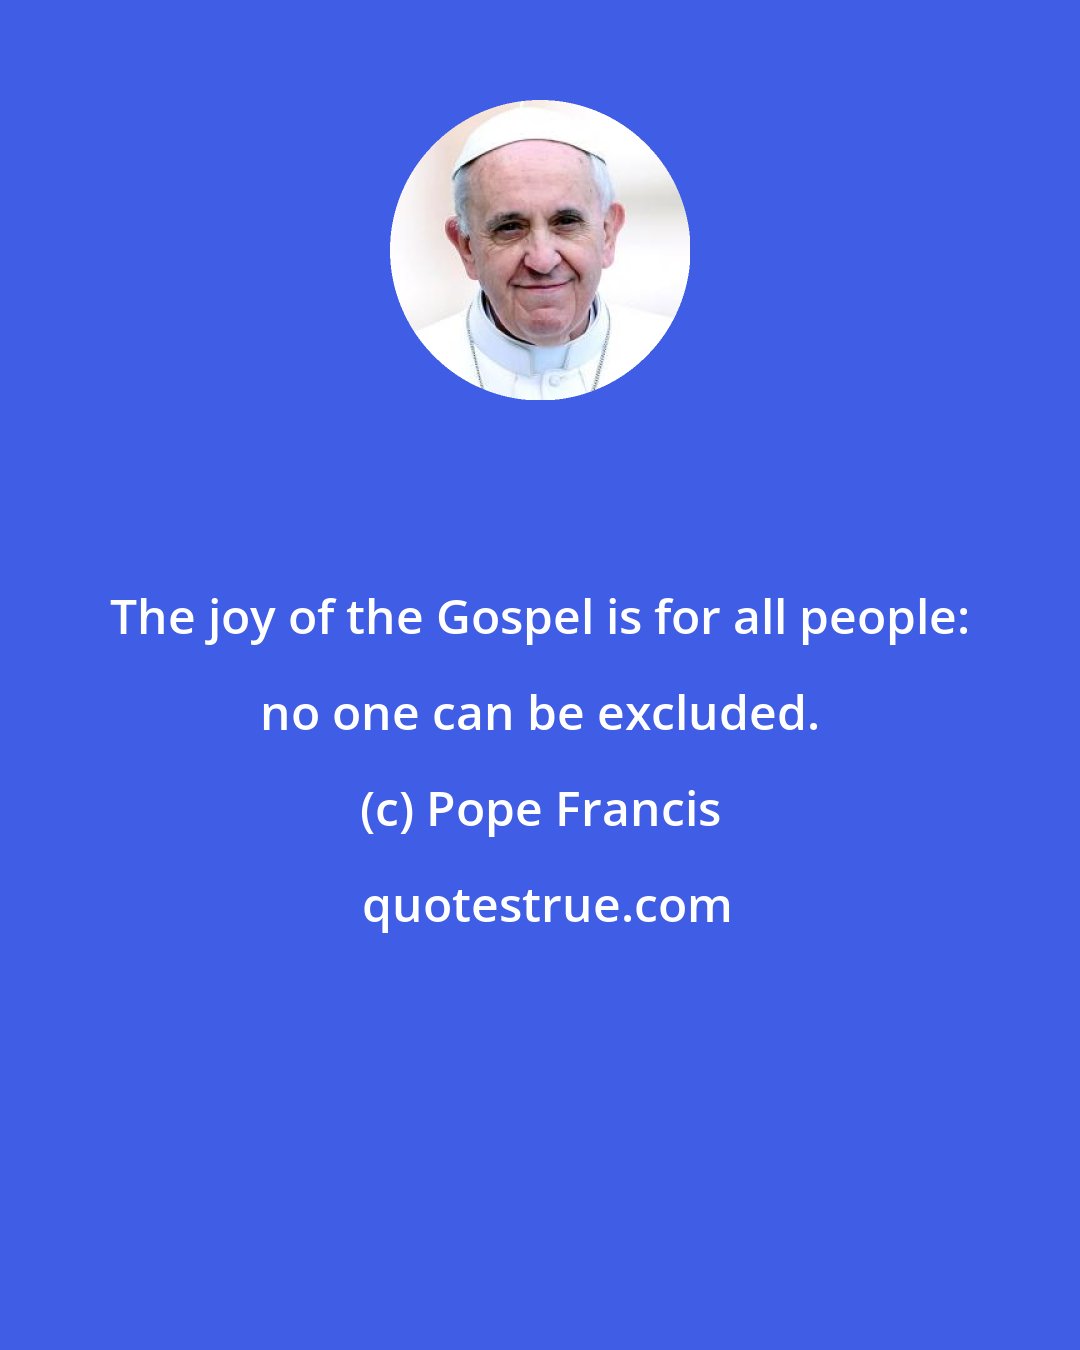 Pope Francis: The joy of the Gospel is for all people: no one can be excluded.